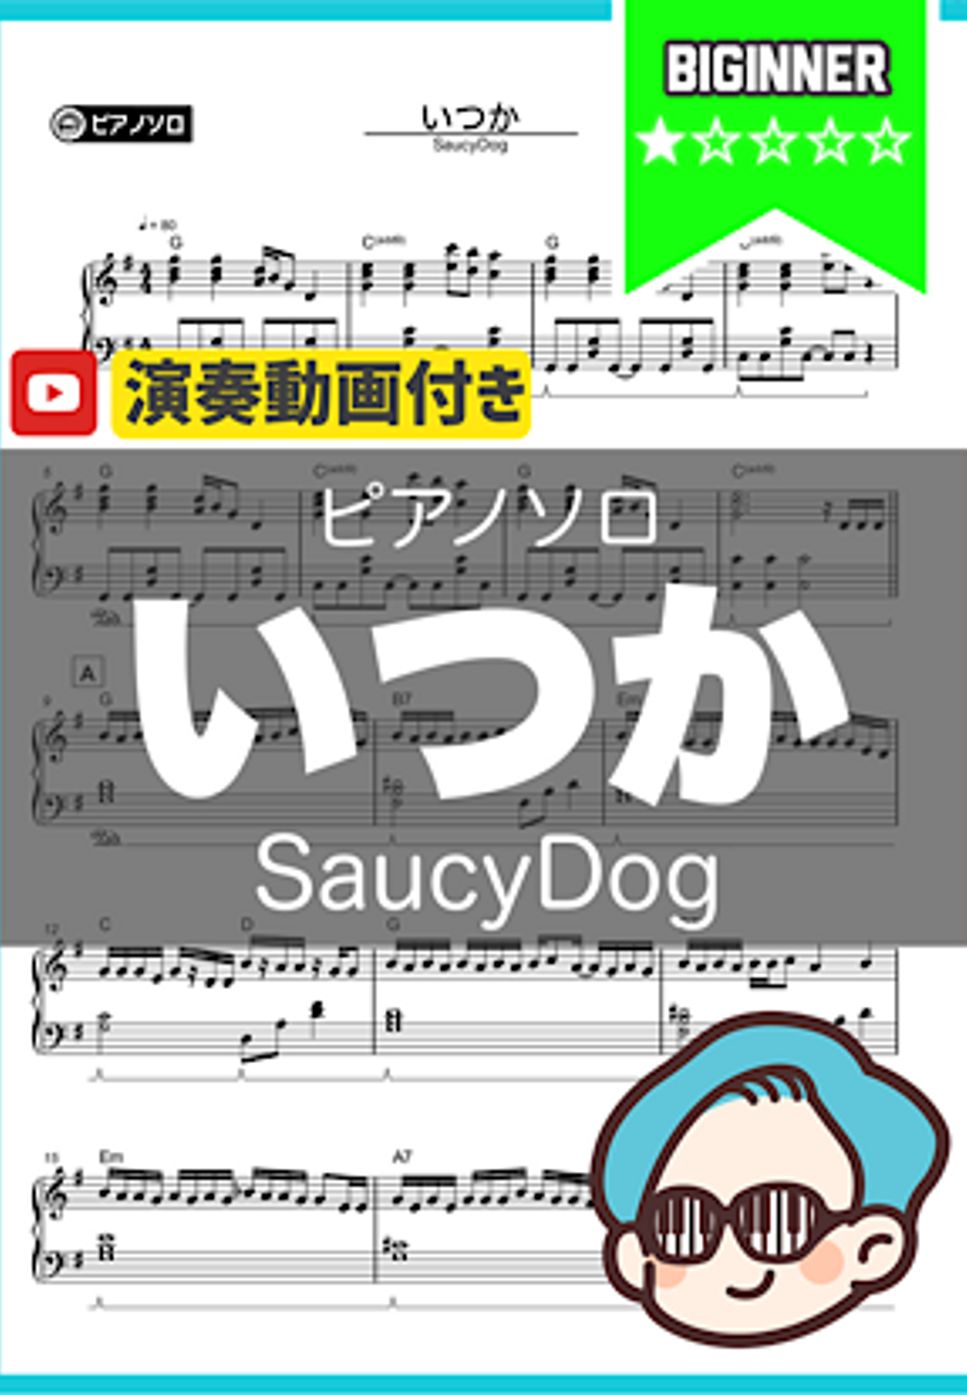 Saucy Dog - いつか by THETA